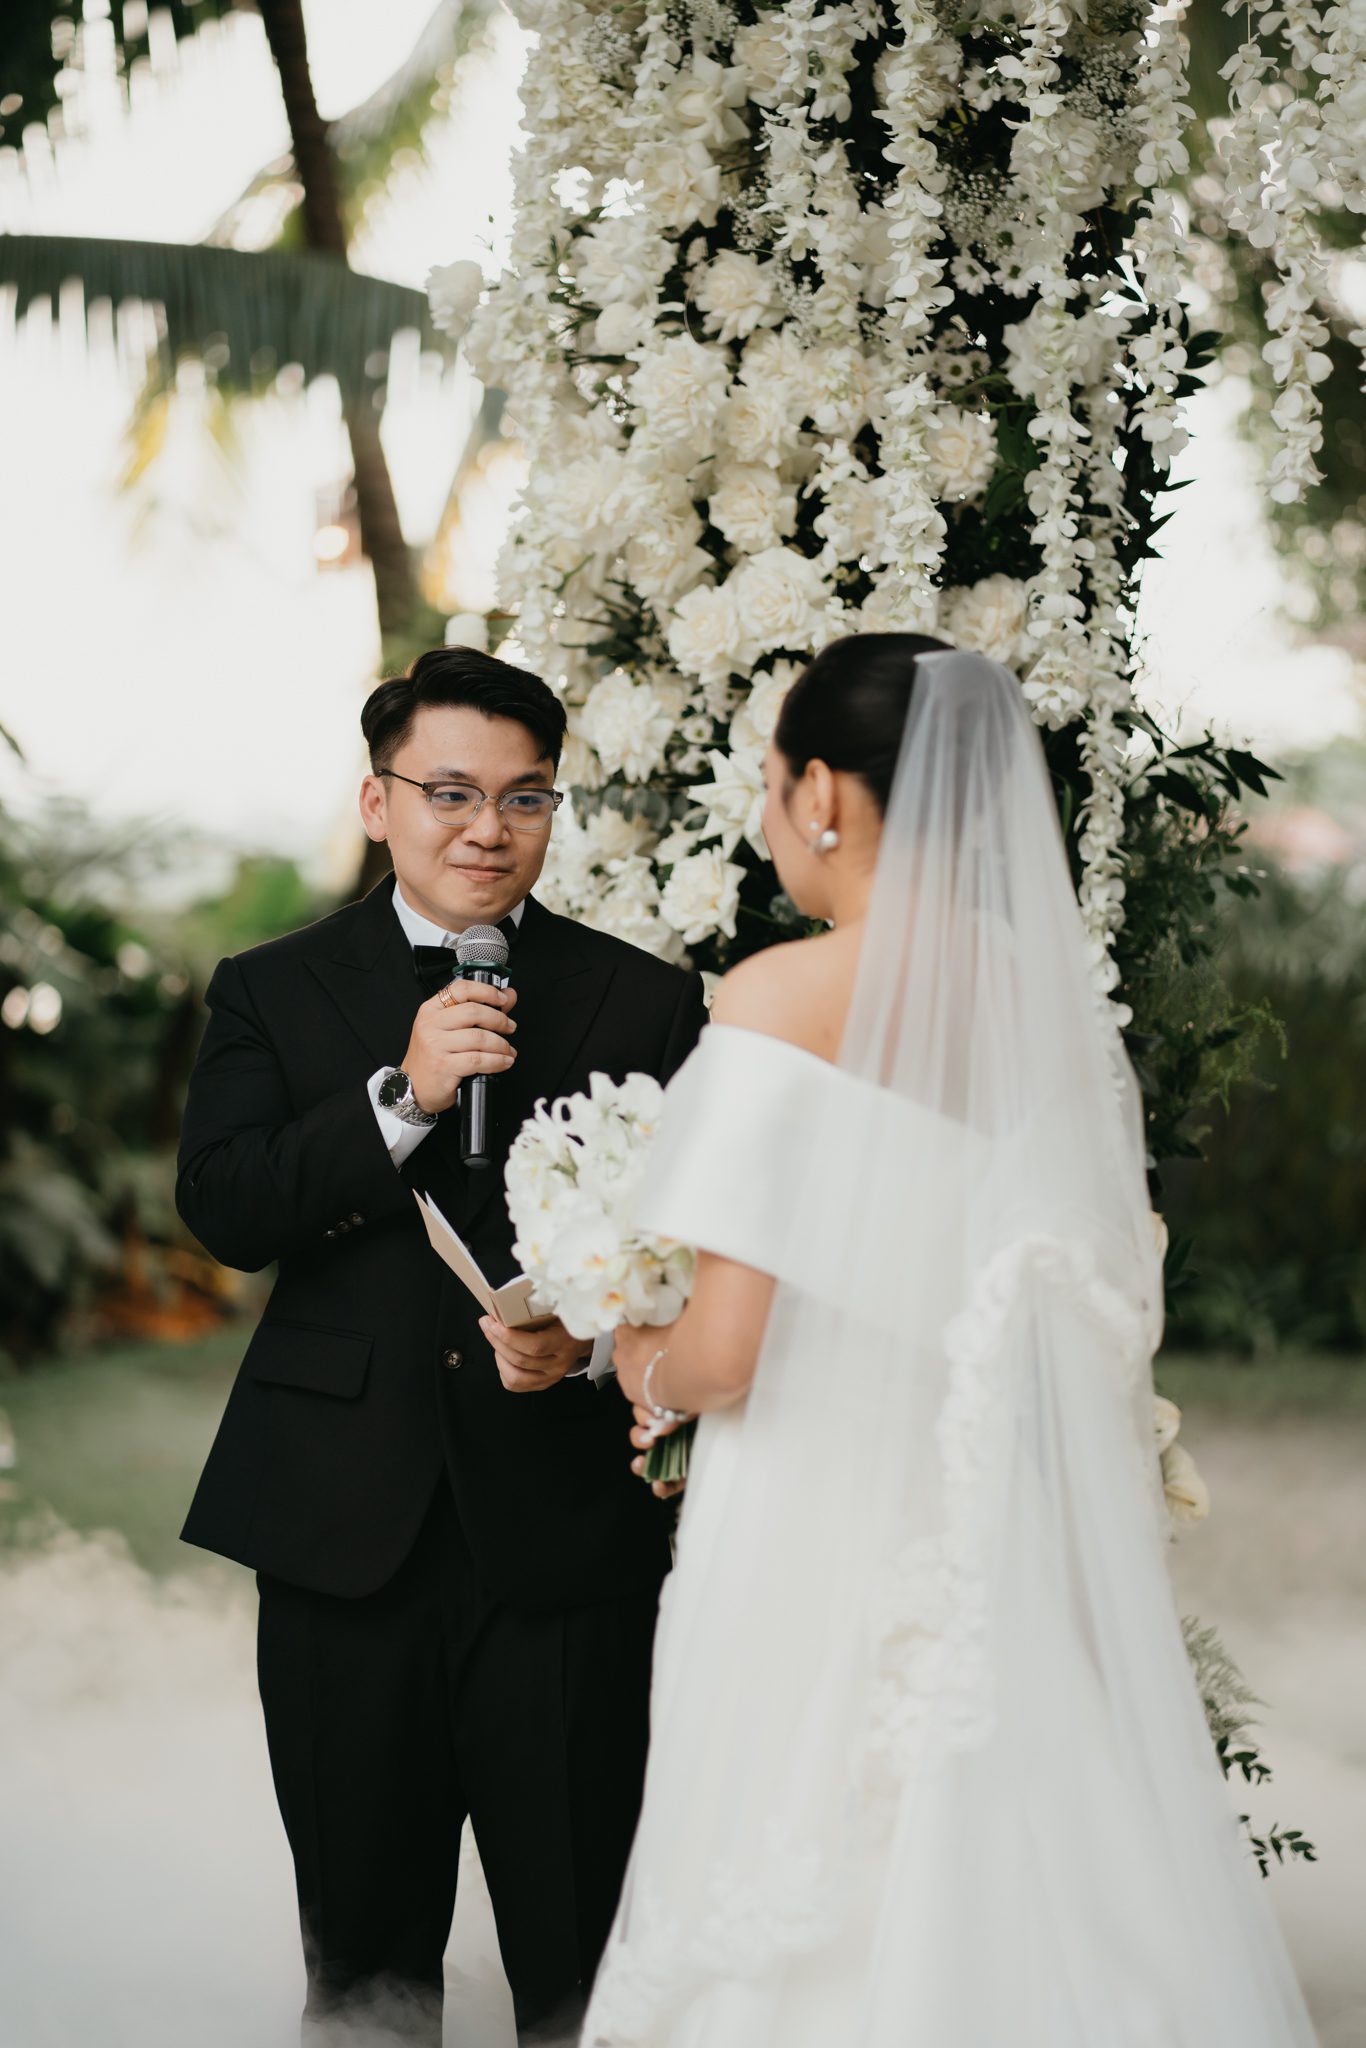 Saigon intimate wedding at An Lam Retreat 00875 - The Planners